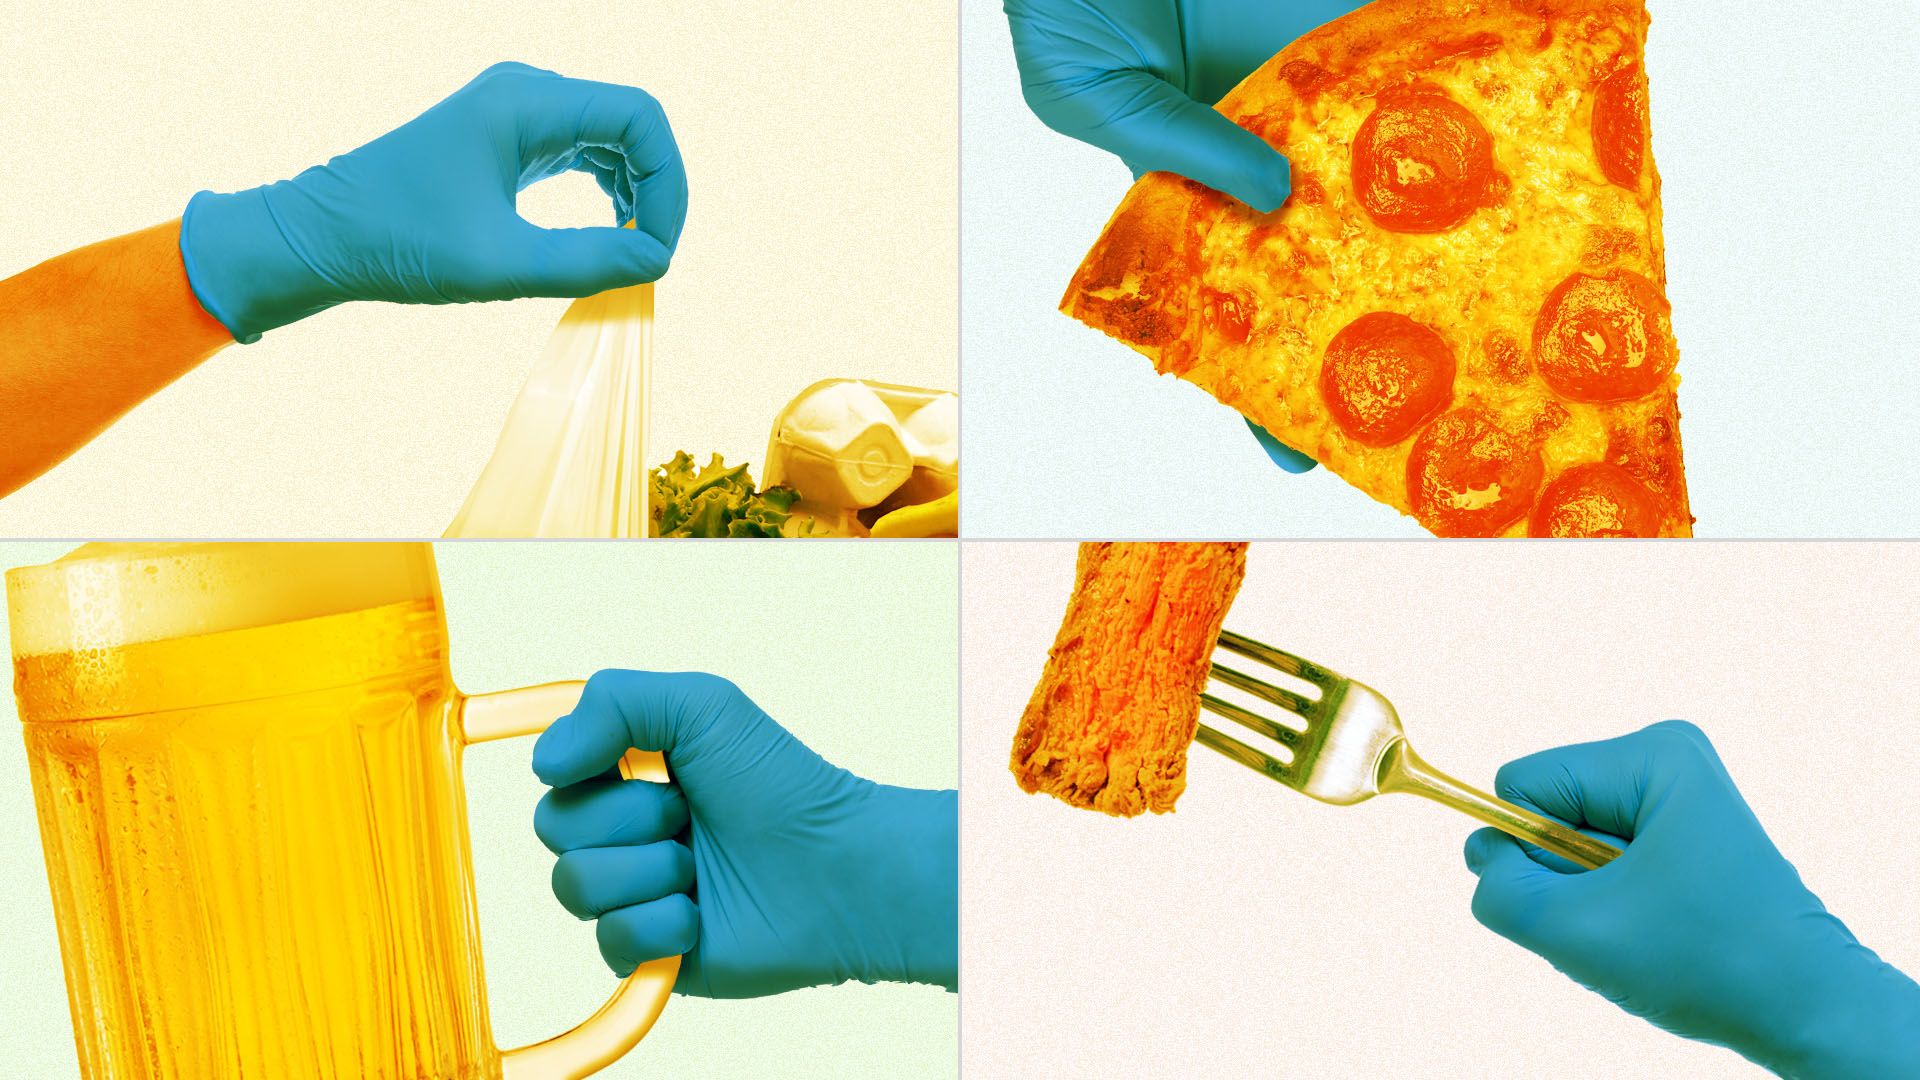 Illustration of hands in medical gloves holding food delivery, a beer stein, a slice of pizza, and a fork with steak